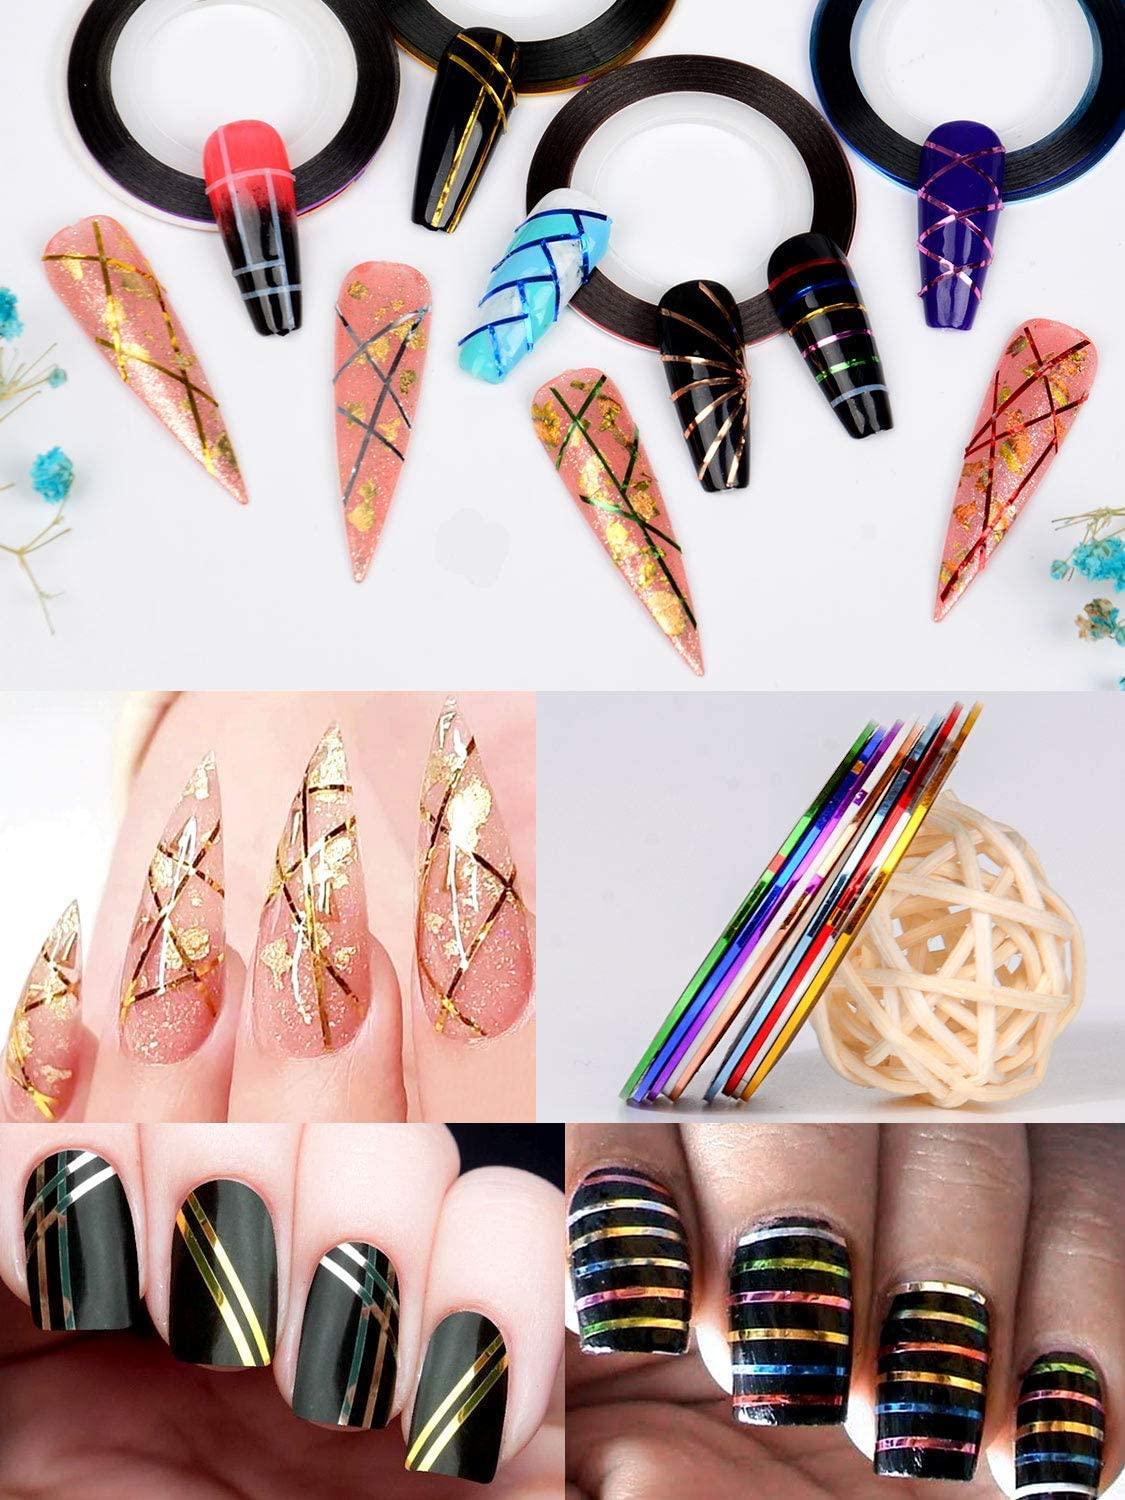 Nail Stickers in Nail Art 